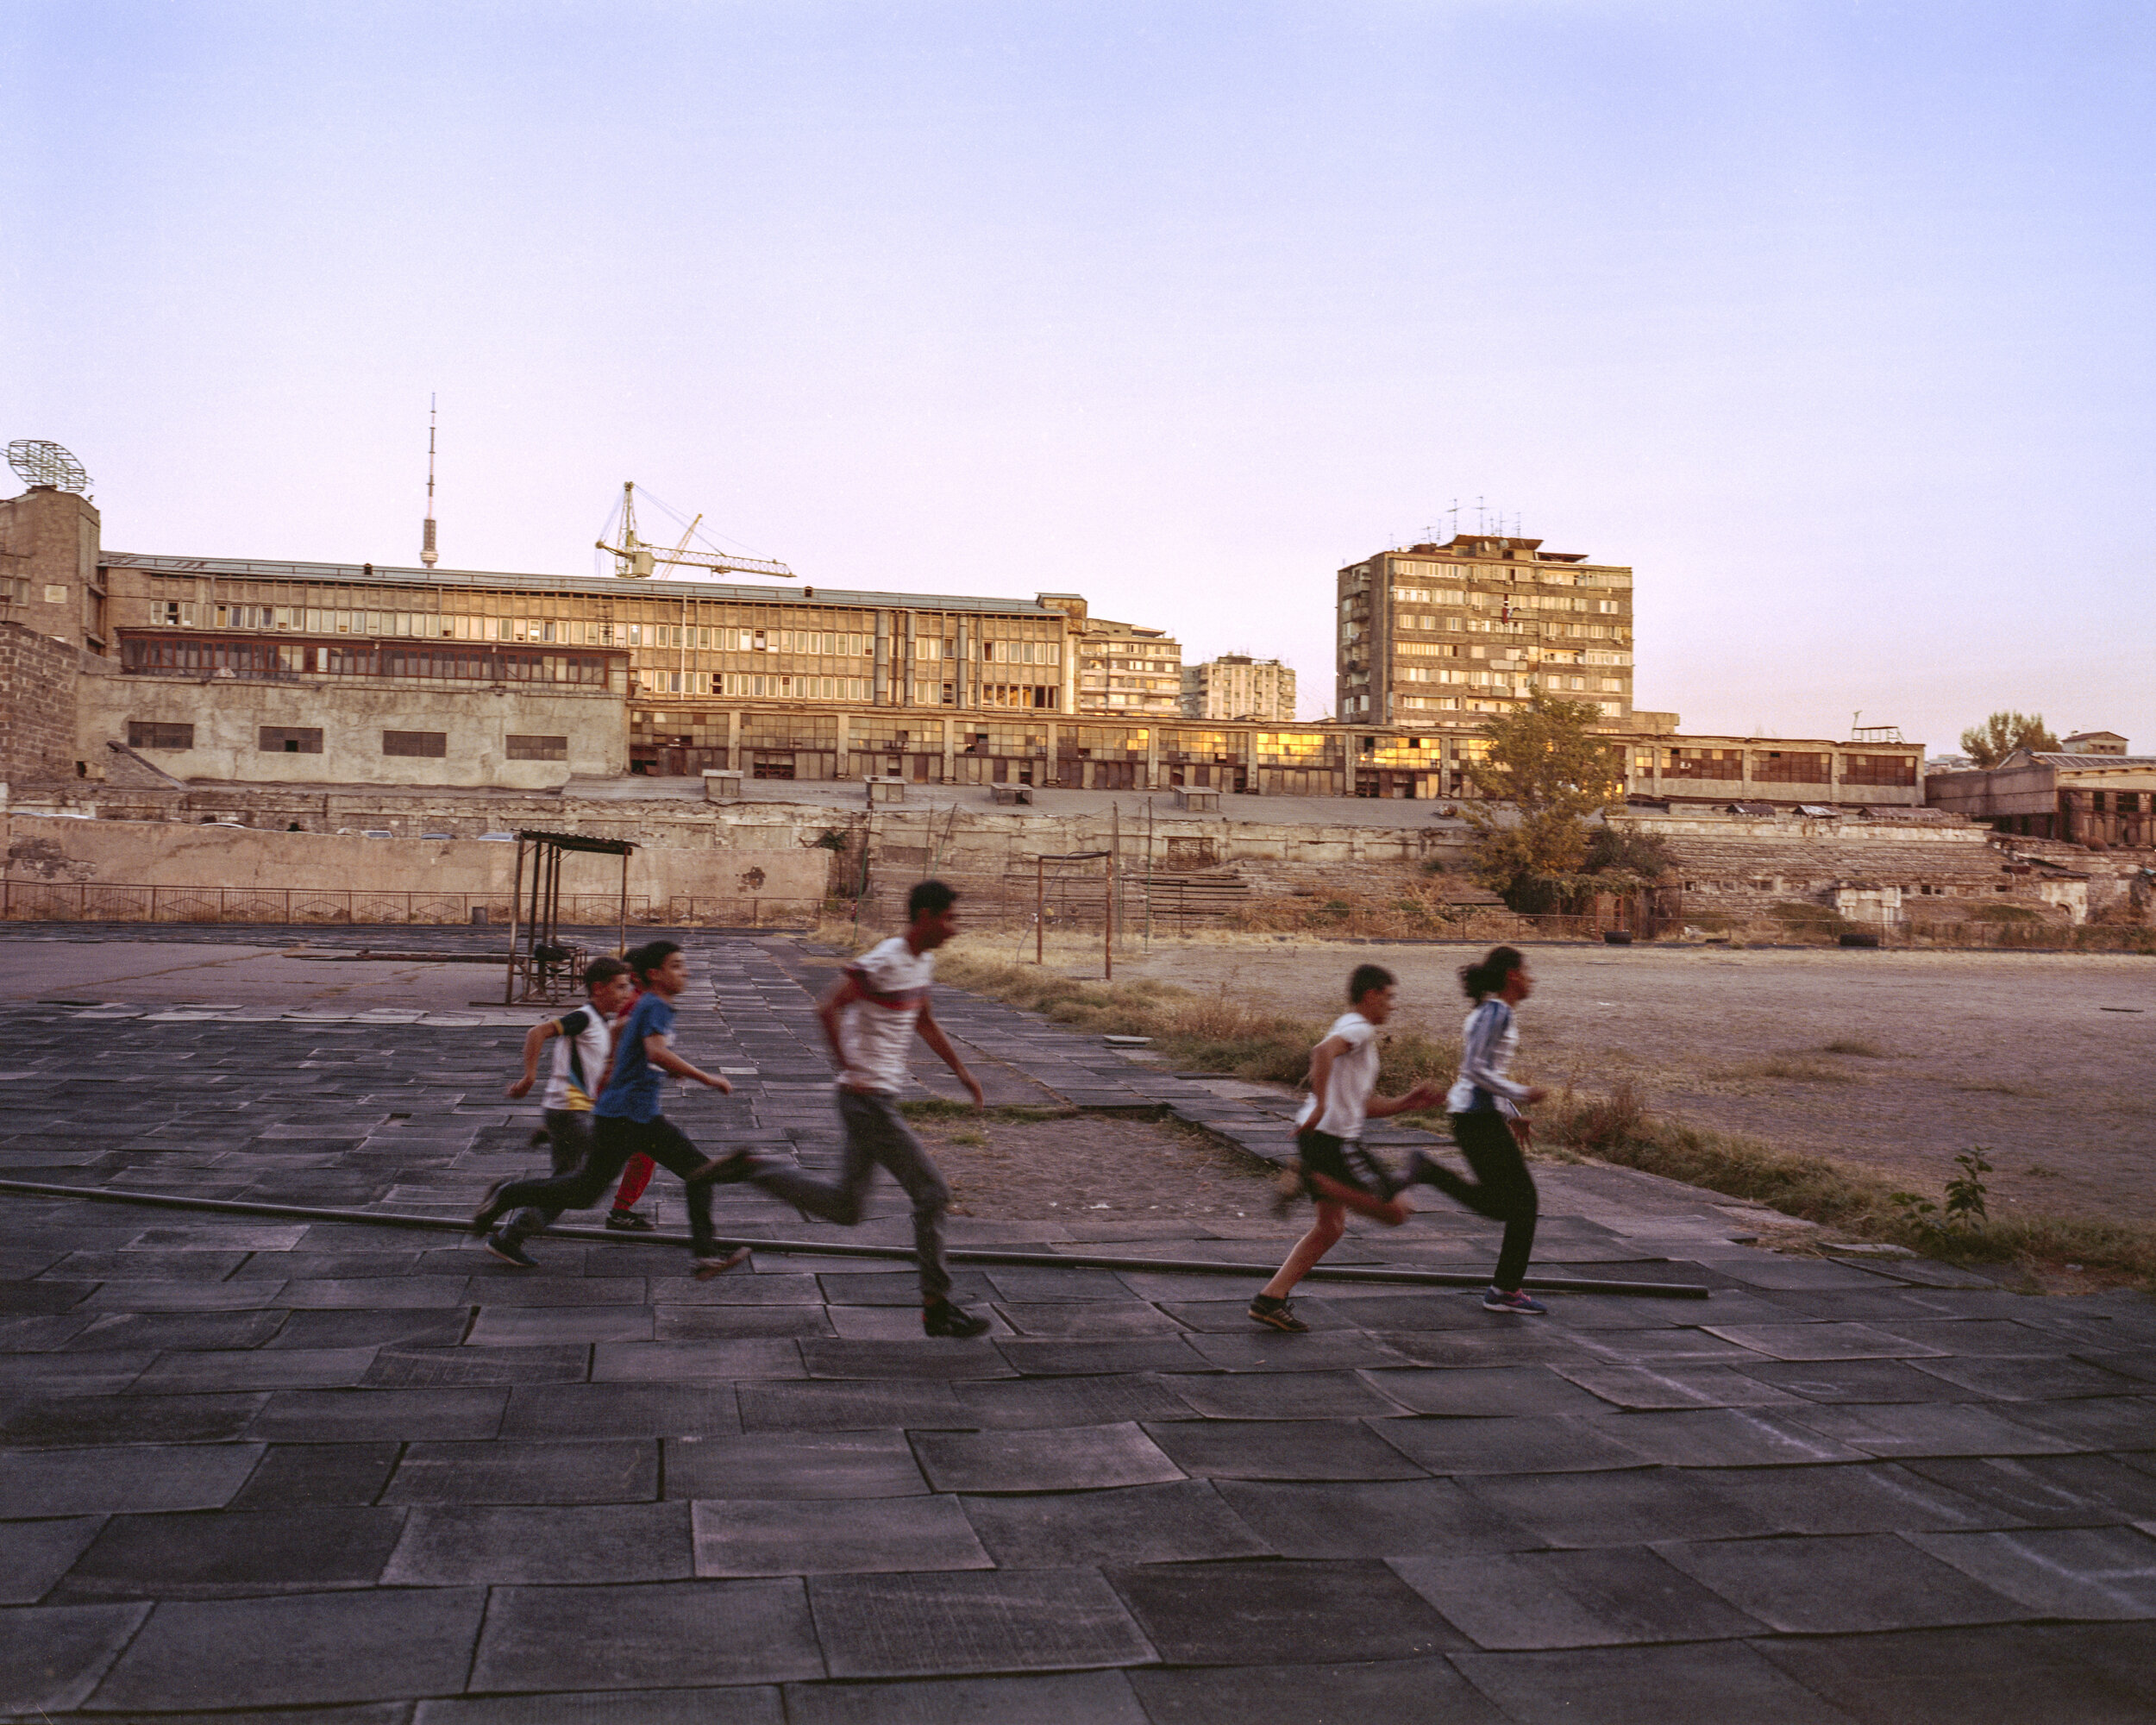   Armenia Sports Union, formerly known as Spartak, is one of the first sports associations in Yerevan mainly involved in individual Olympic sports. It has an outdoor pitch filled with students everyday.      Yerevan, Armenia, 2018  